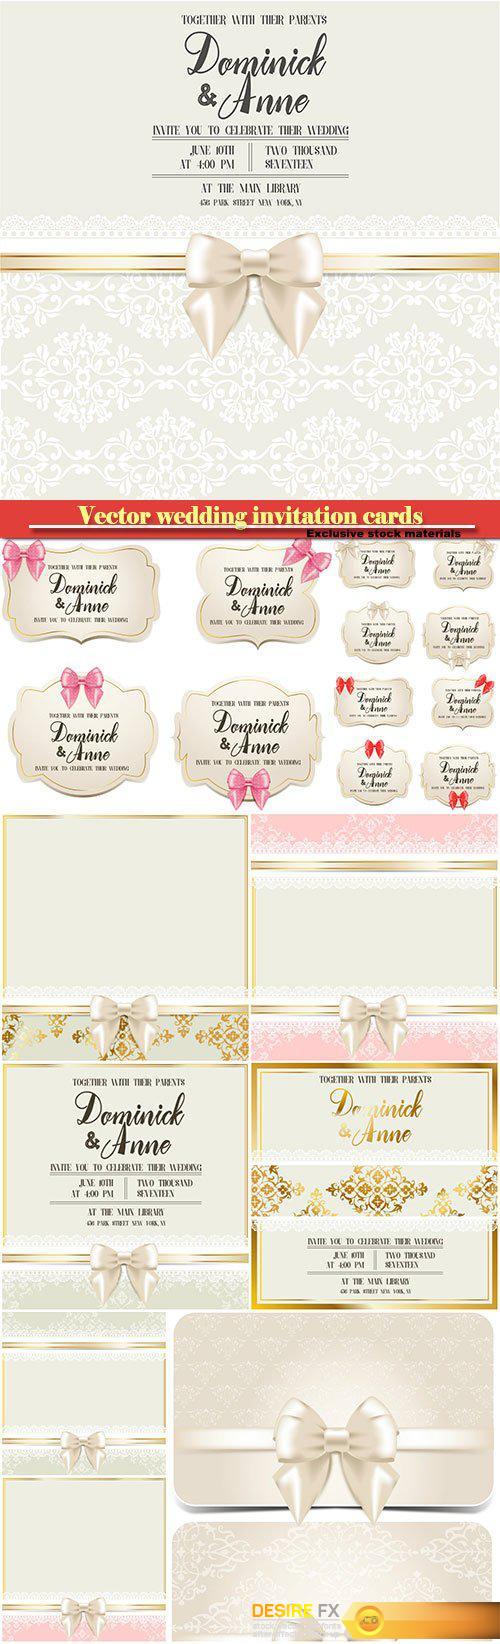 Wedding cards and invitation cards in vector